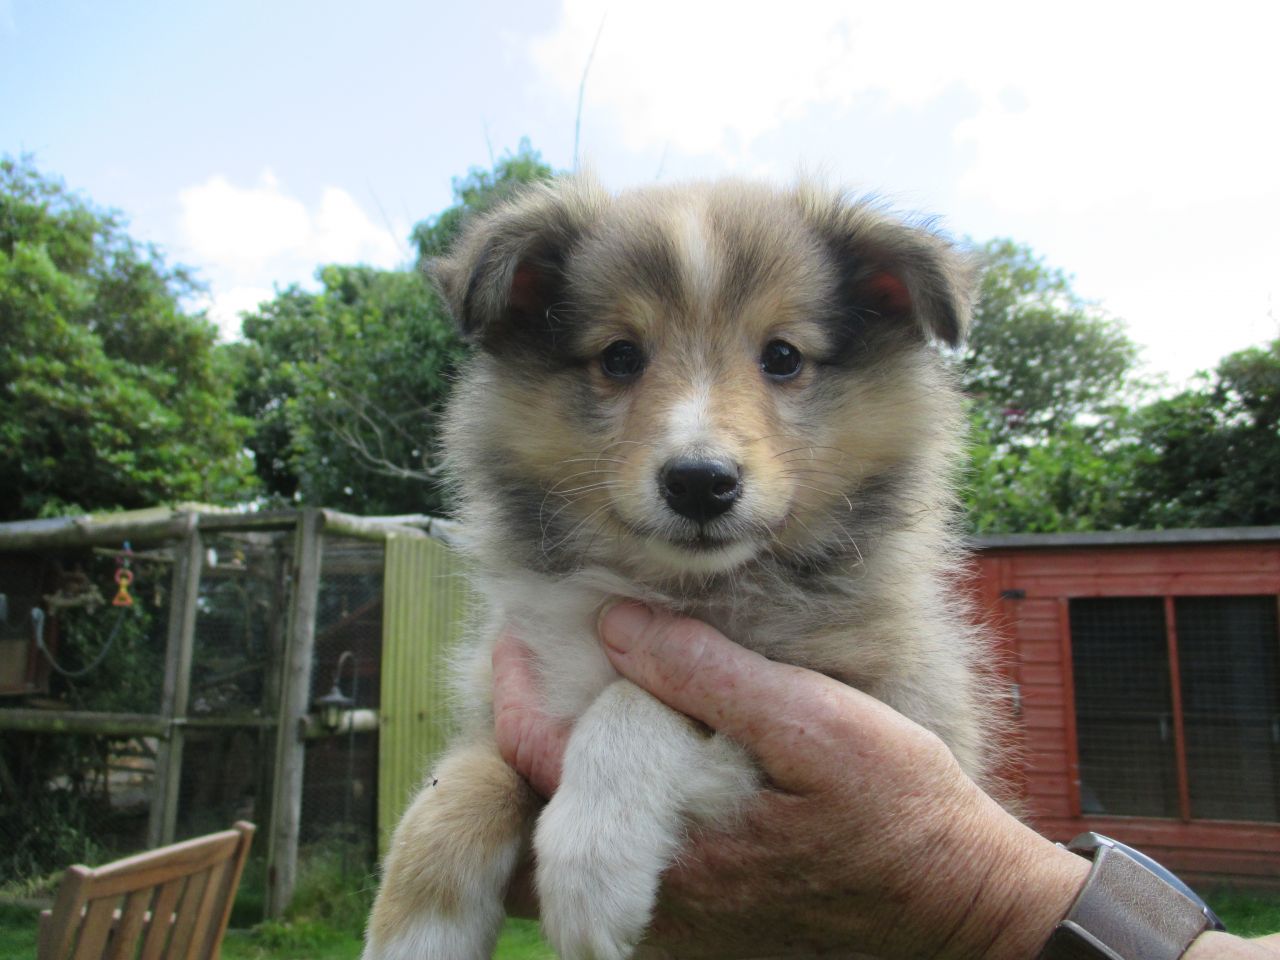 Shetland Sheepdog Puppies: Shetland Shetland Sheepdog Puppies For Sale St Austell Breed